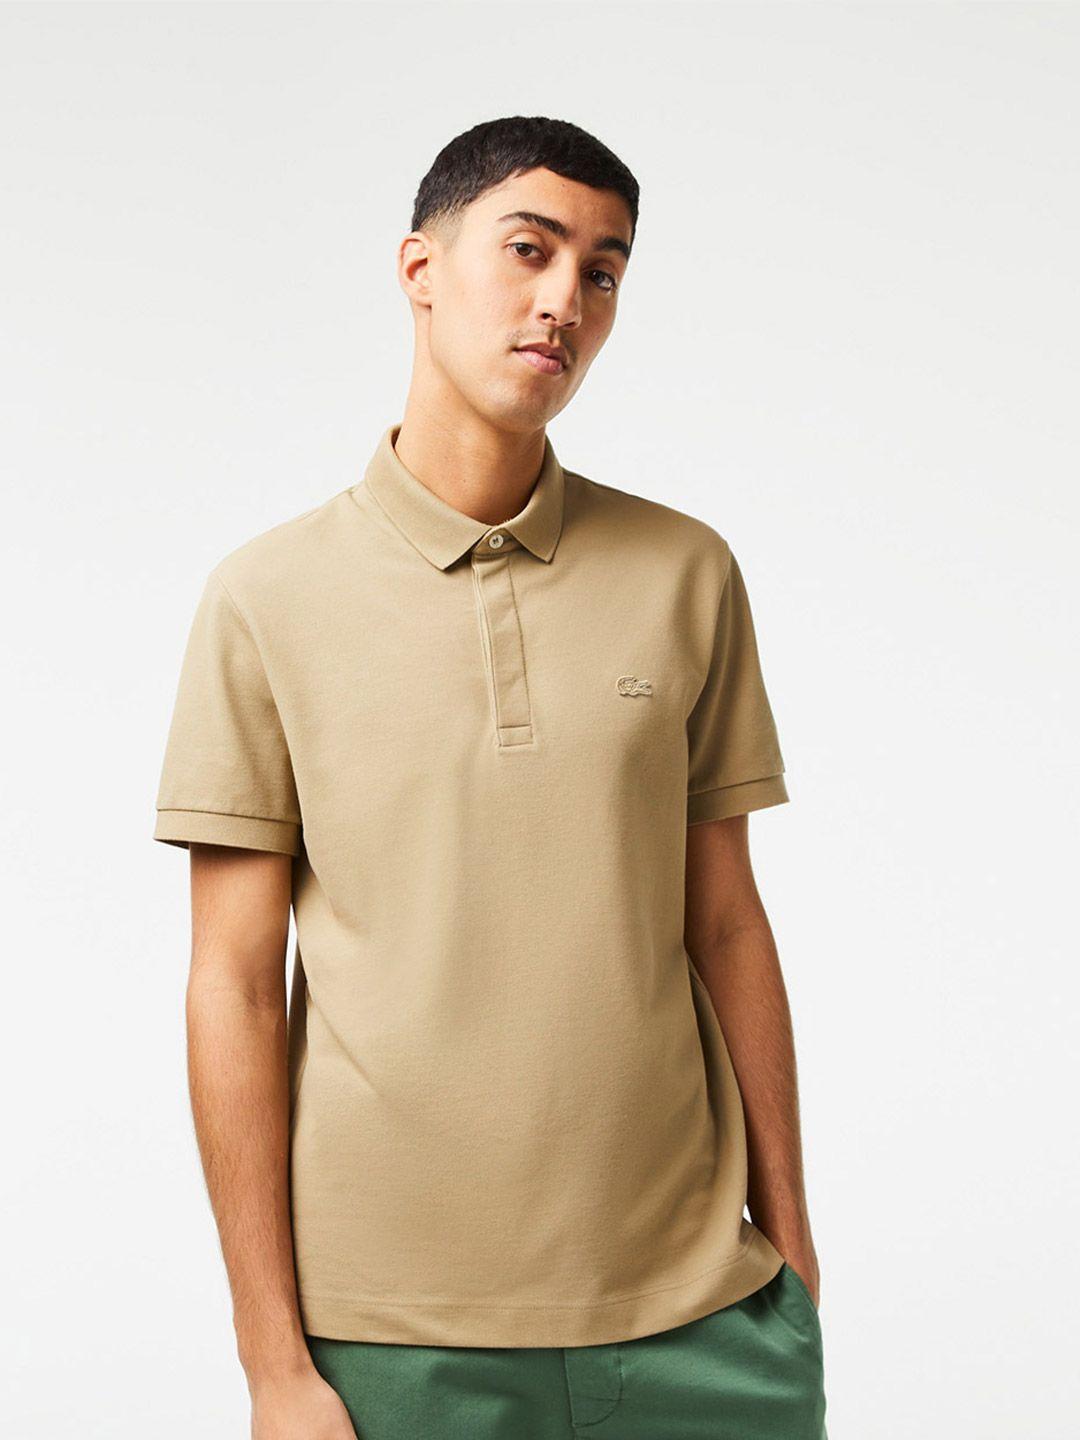 lacoste-polo-collar-short-sleeves-t-shirt